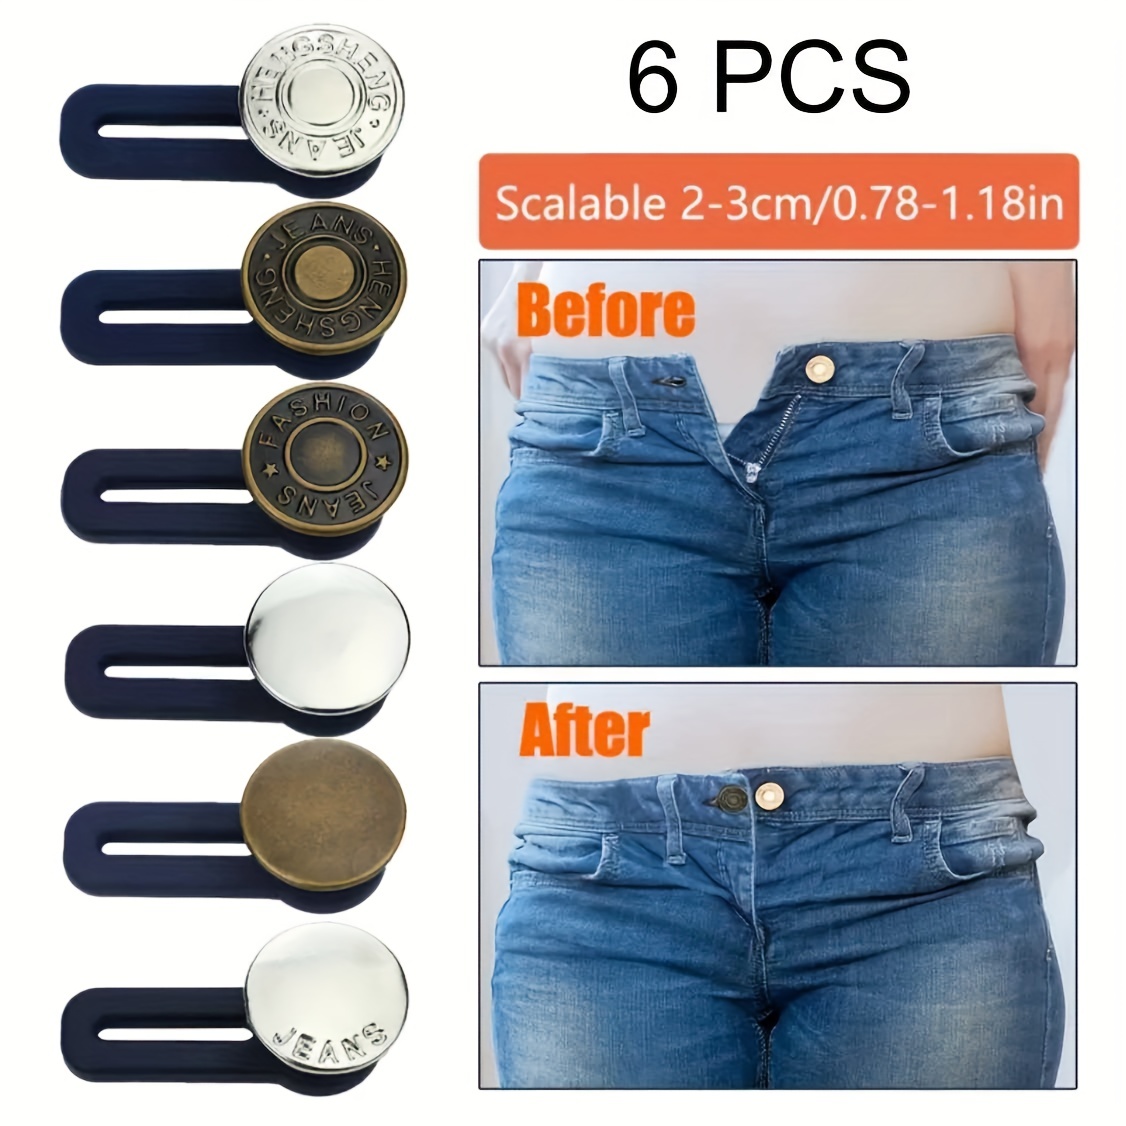  Jean Buttons Pins, 9 Pcs Adjustable Pants Button Tightener,  17mm No Sew Metal Instant Buttons Replacement to Size Down Waist  (Silver/Bronze) : Arts, Crafts & Sewing